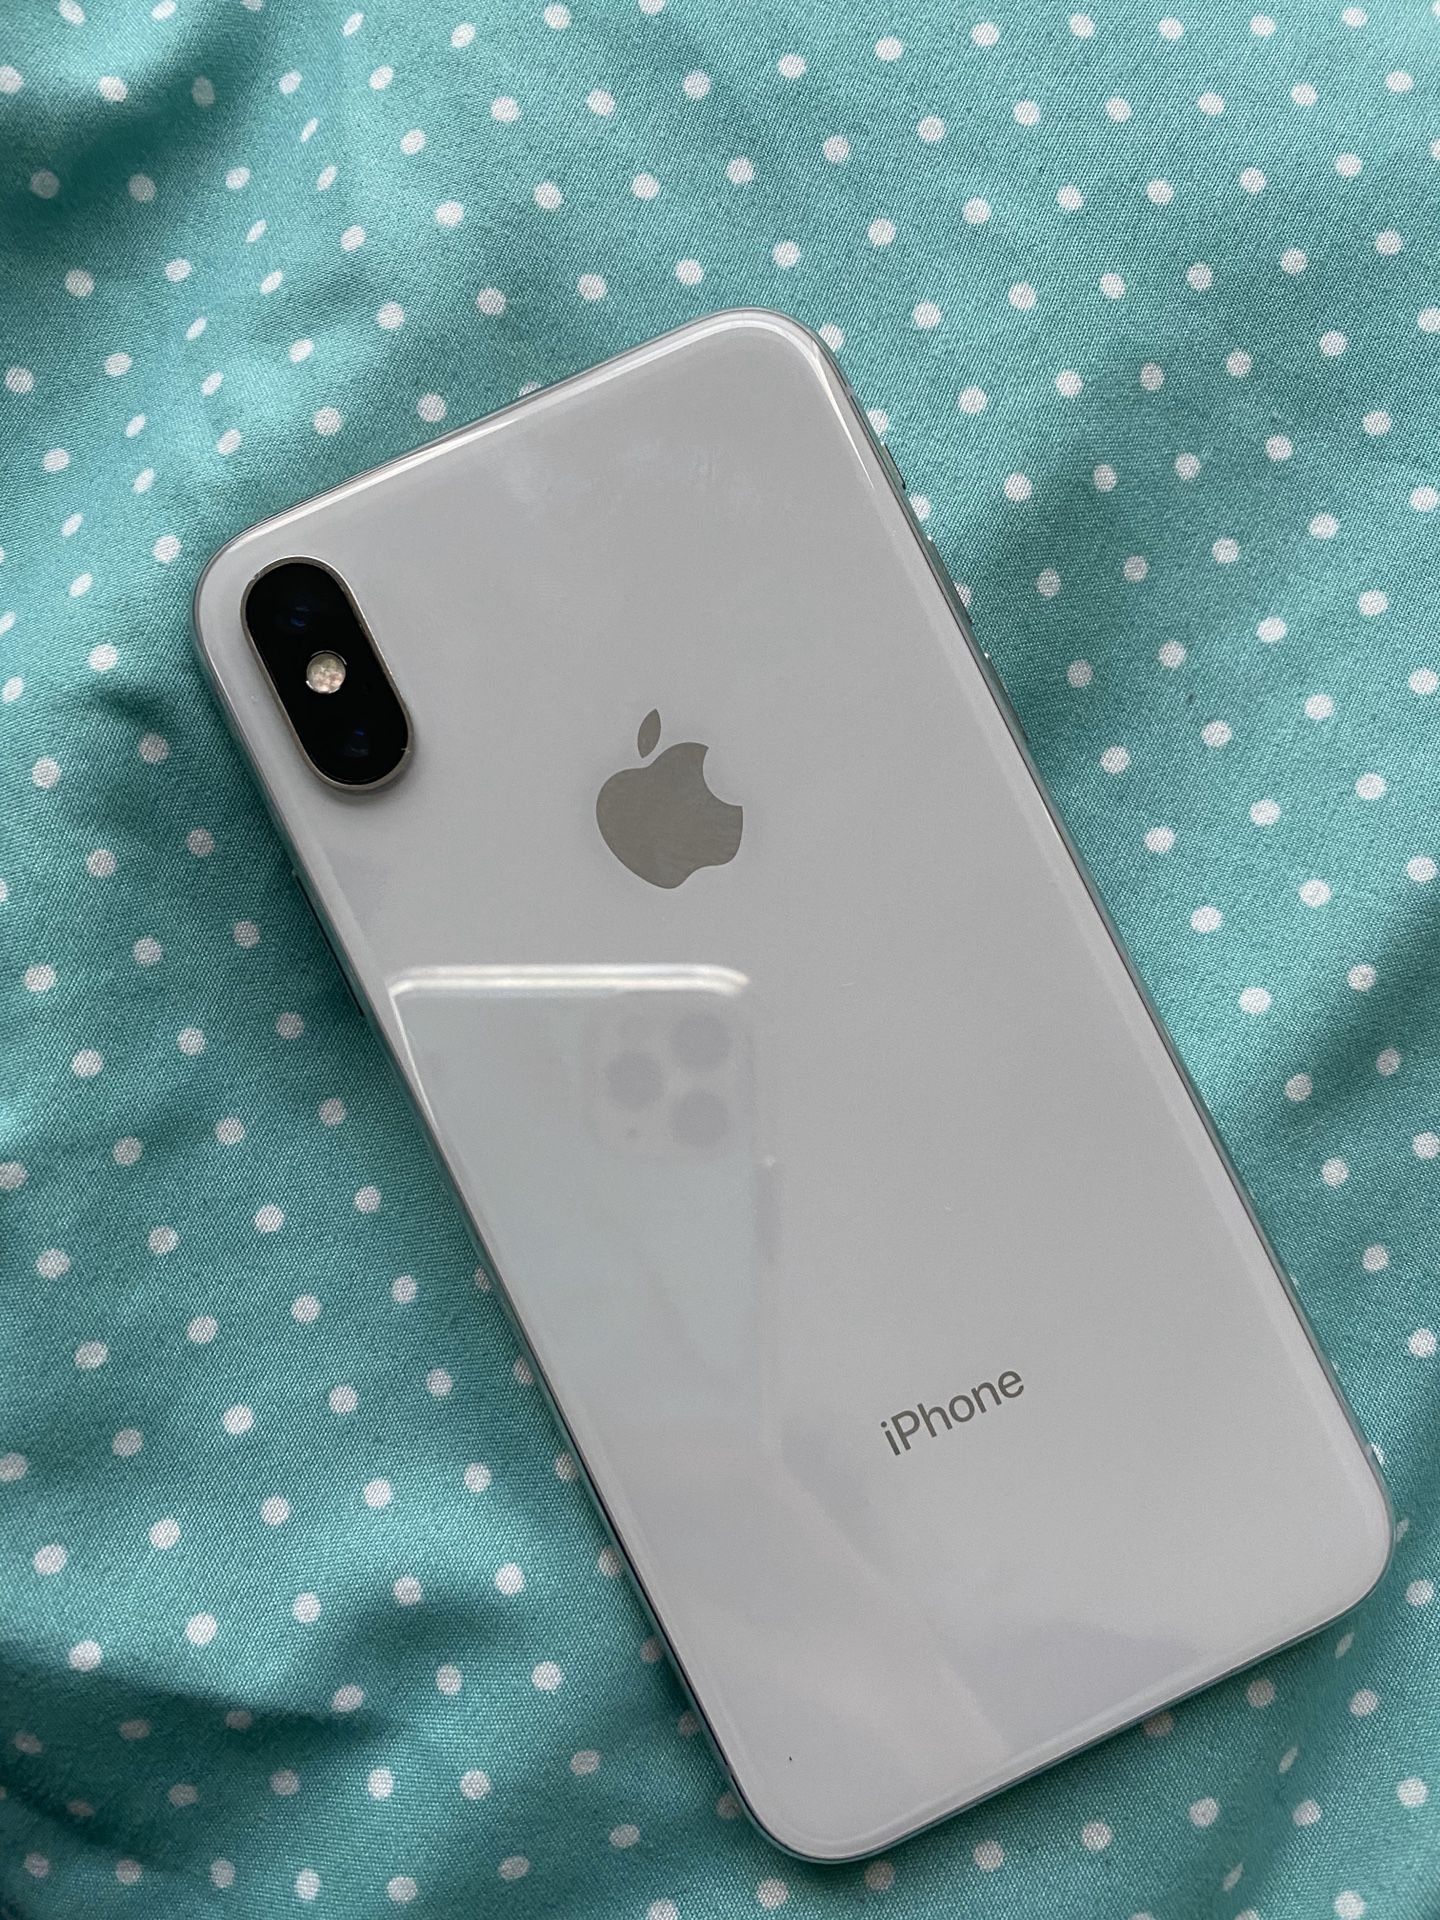 iPhone X for sale